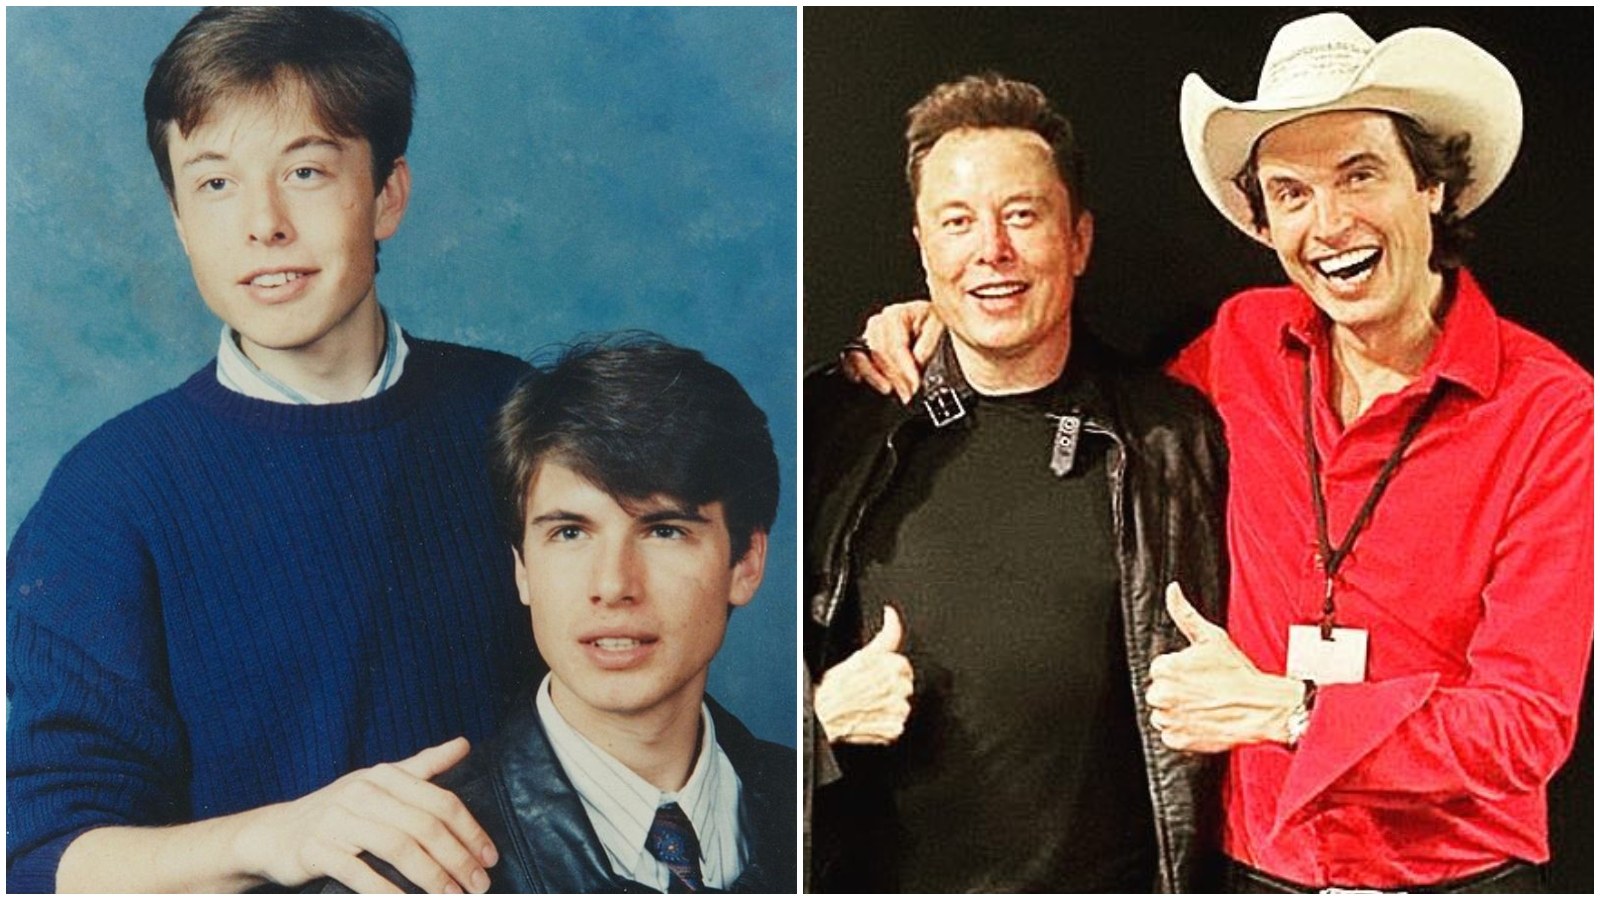 Elon and Kimbal Musk both had a wealthy upbringing and are now business entrepreneurs. Photos: @mayemusk, @kimbalmusk/Instagram